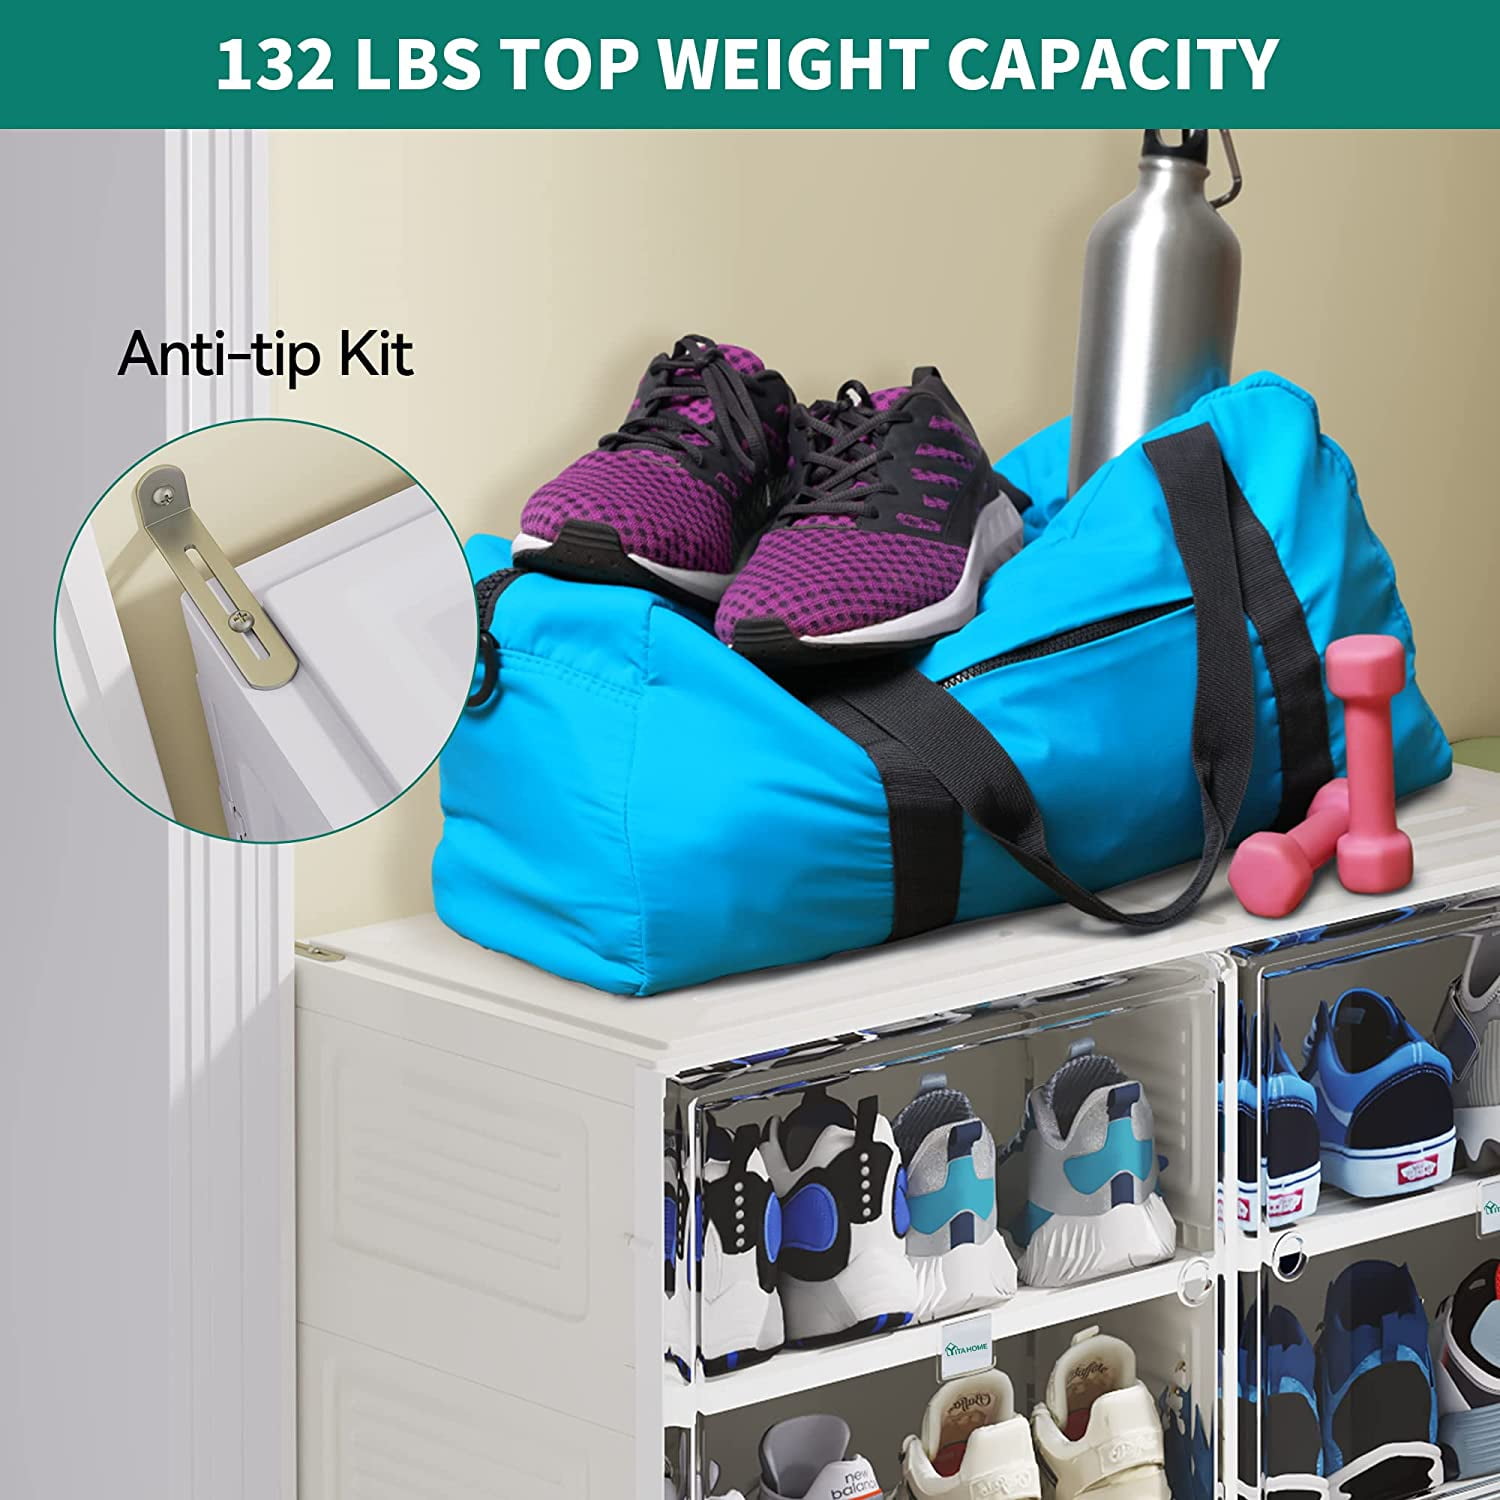 YITAHOME 6 Tiers-24 Pairs Installation Free Shoe Storage Box, Foldable Shoe Organizer with Magnetic Doors, Collapsible Shoe Rack Sneaker Cabinets